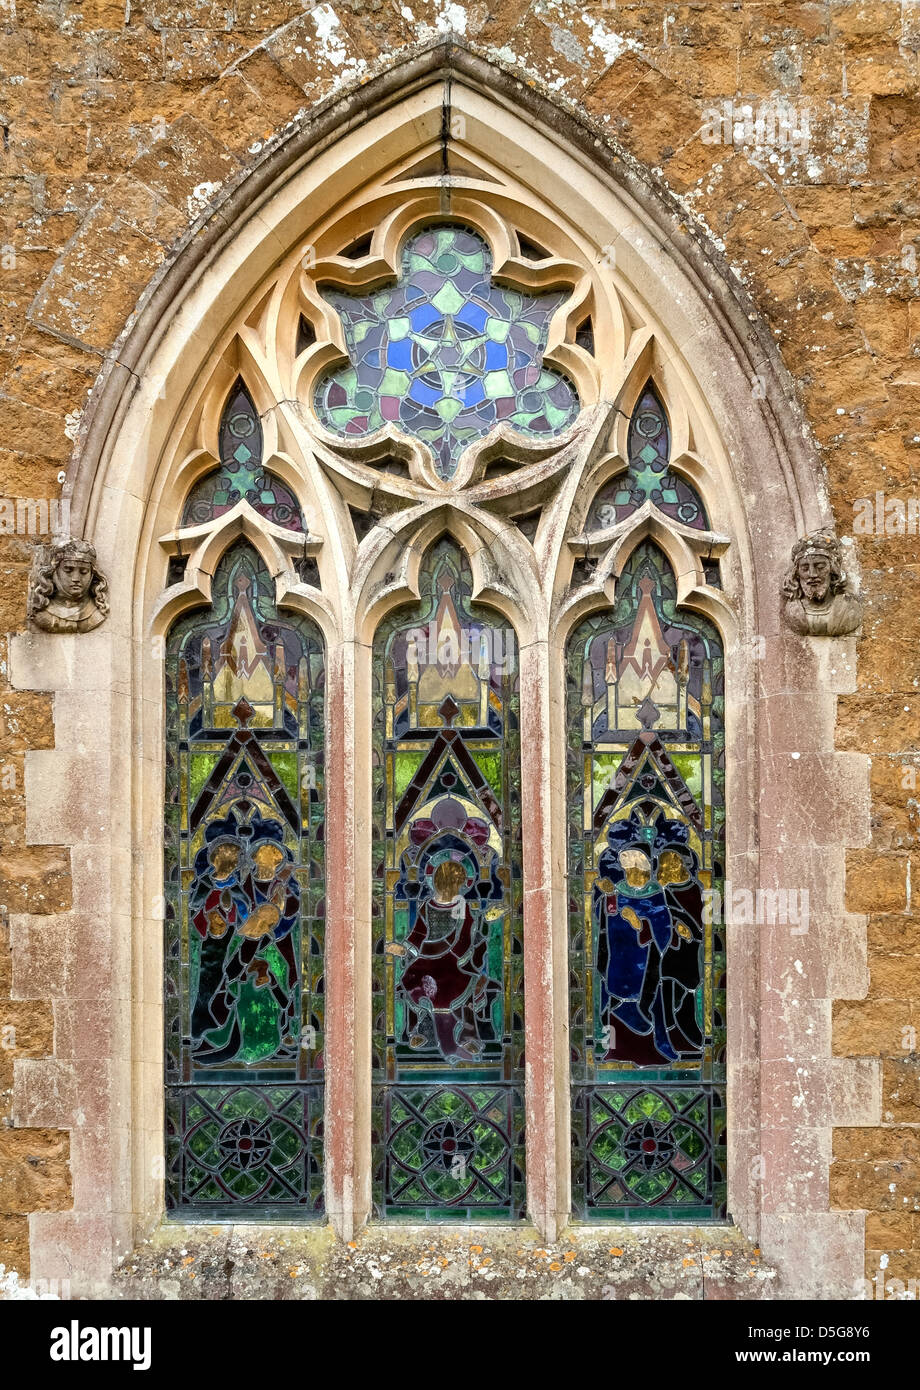 Old stained glass window and Gothic masonry, St James Church, Little Dalby, Melton Mowbray, Leicestershire, England, UK Stock Photo